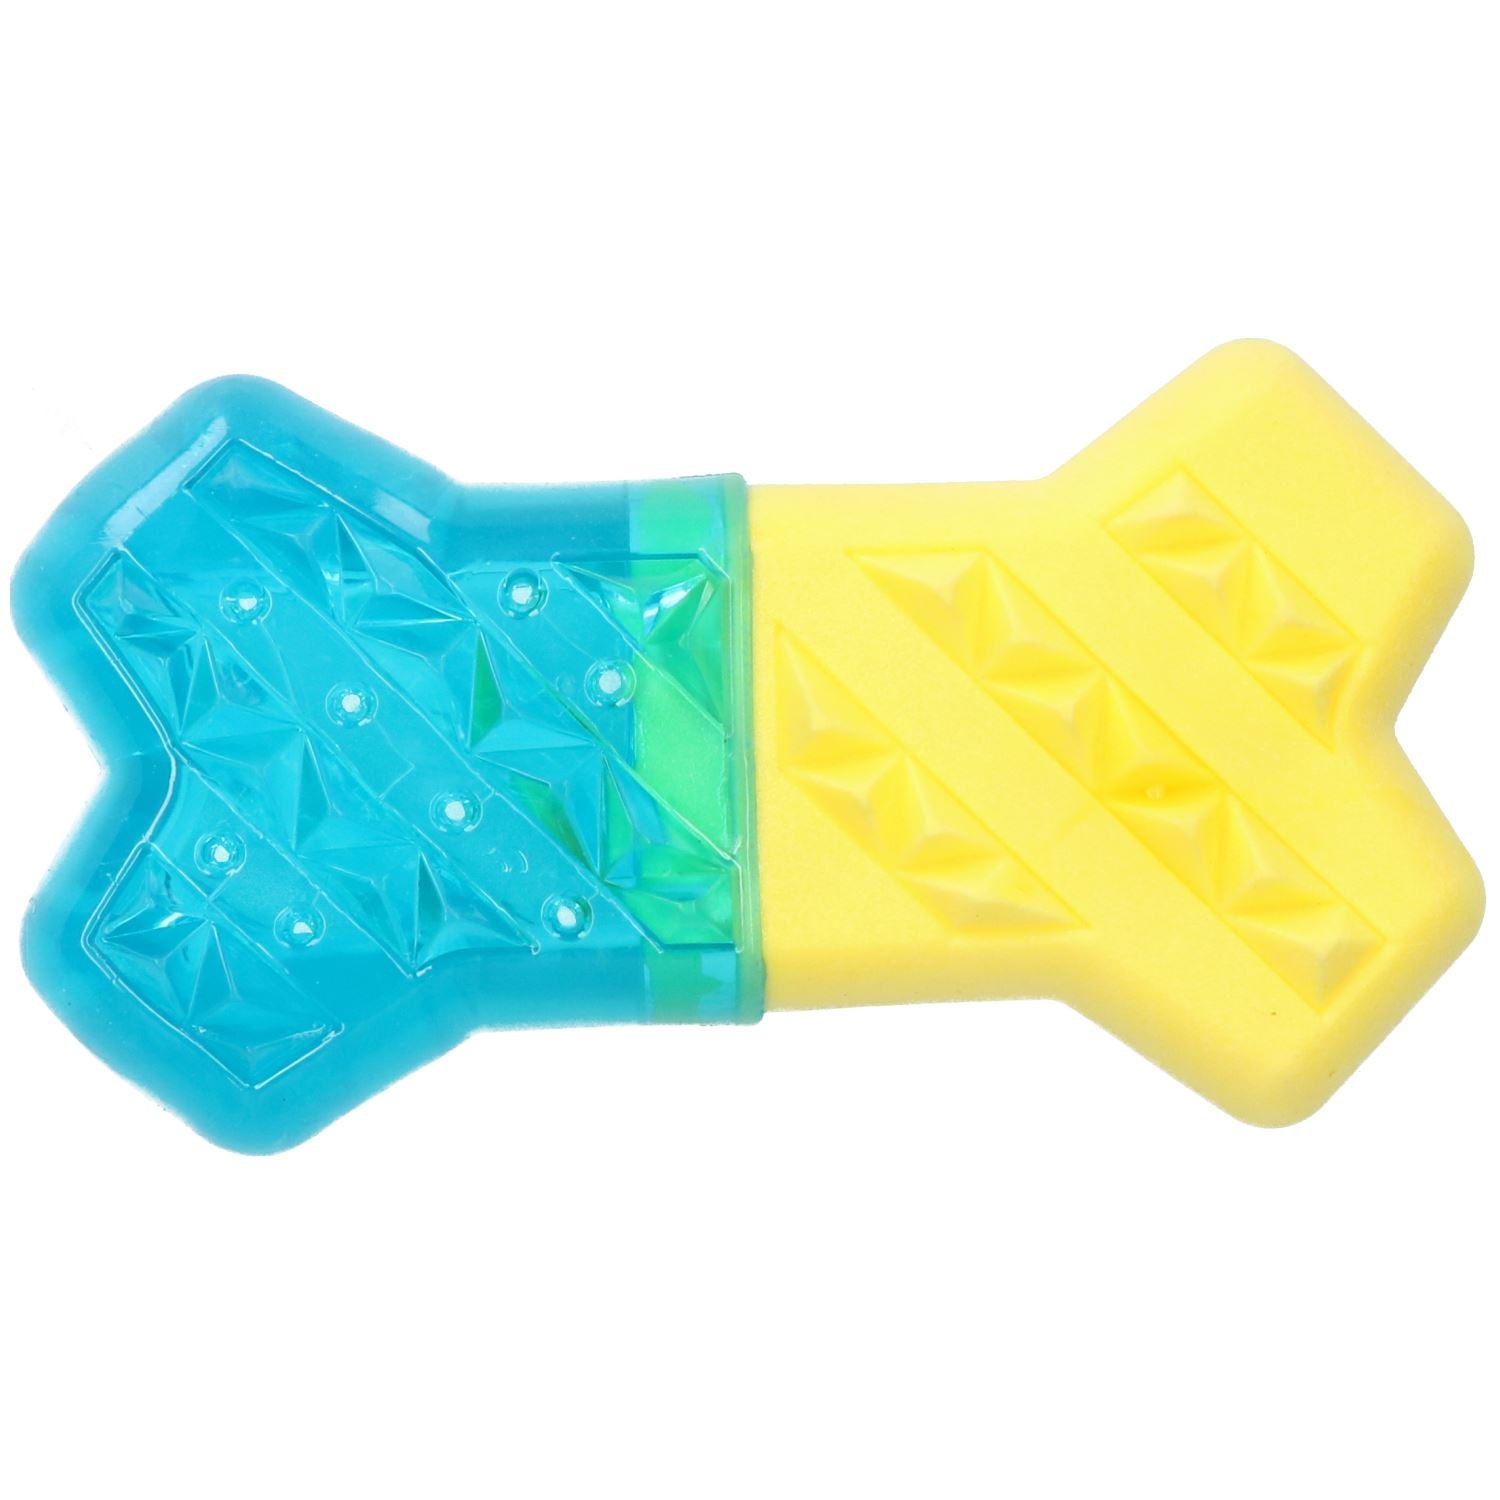 Chillout Cool Soak Ball, Shark & Bone Bundle Dog Toy Heat Relief Puppy Teething